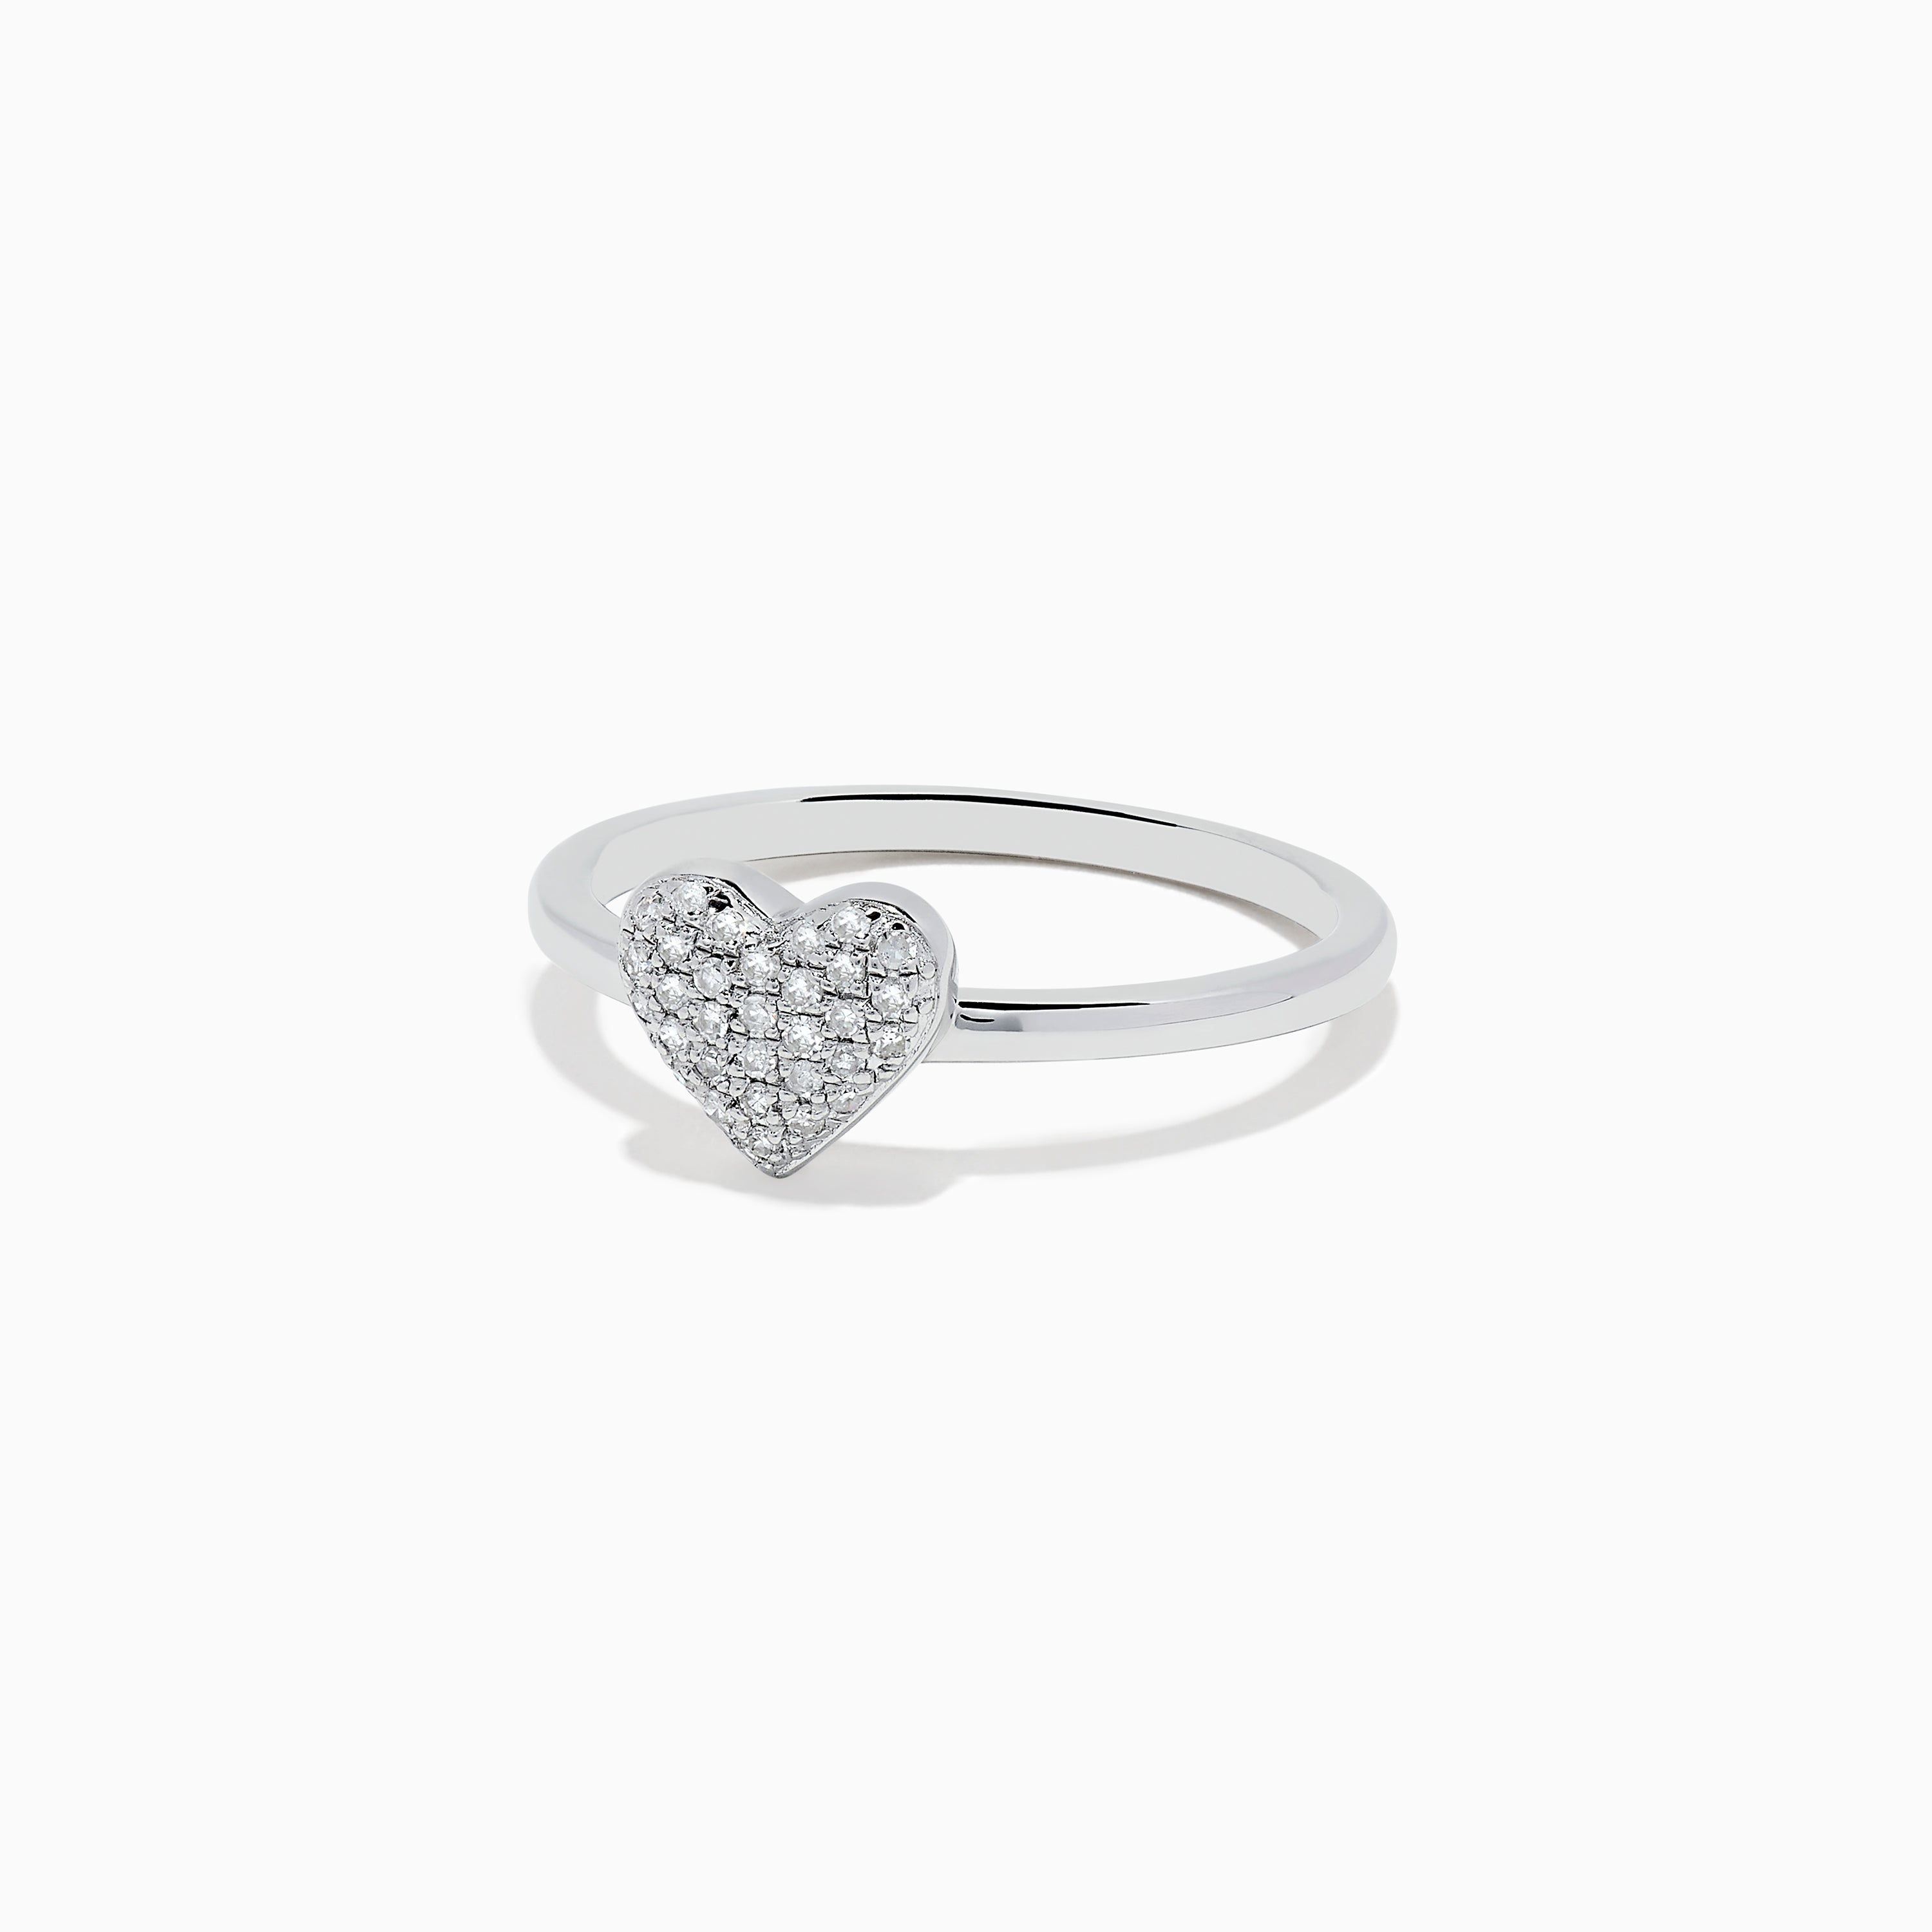 Hallmark Fine Jewelry With All My Heart Promise Ring in Sterling Silve